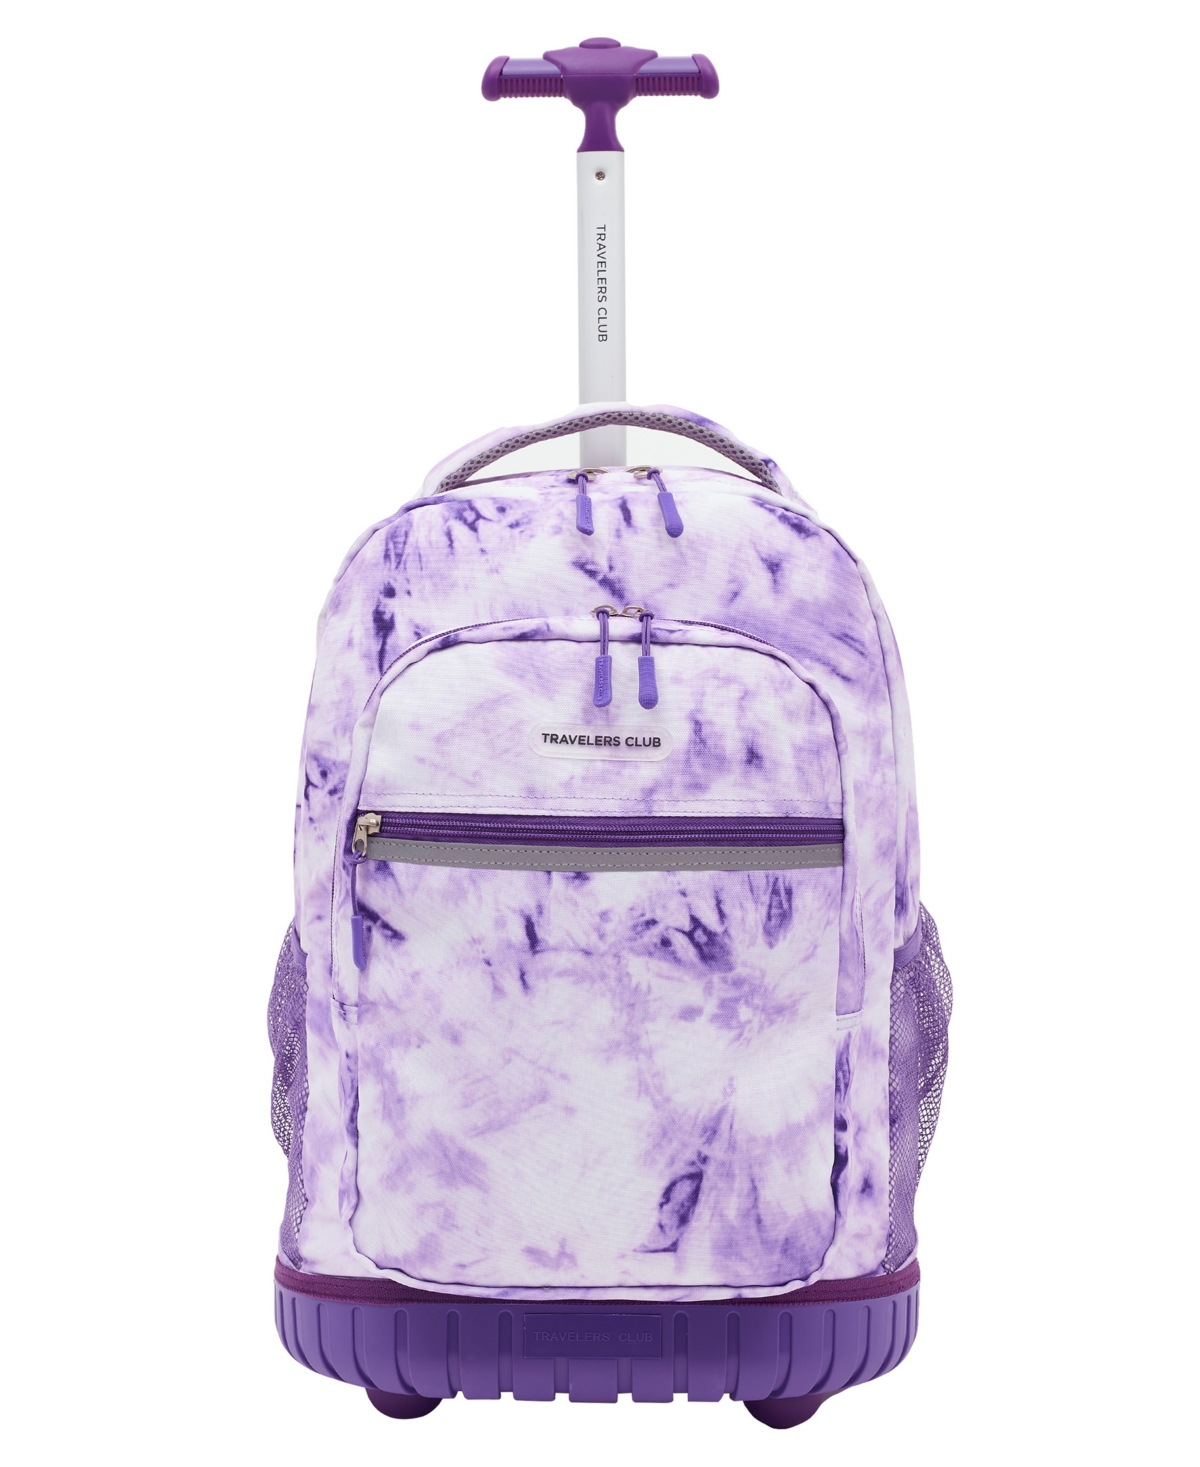 Travelers Club Finley Collection 18" Rolling Backpack In Purple Tie Dye